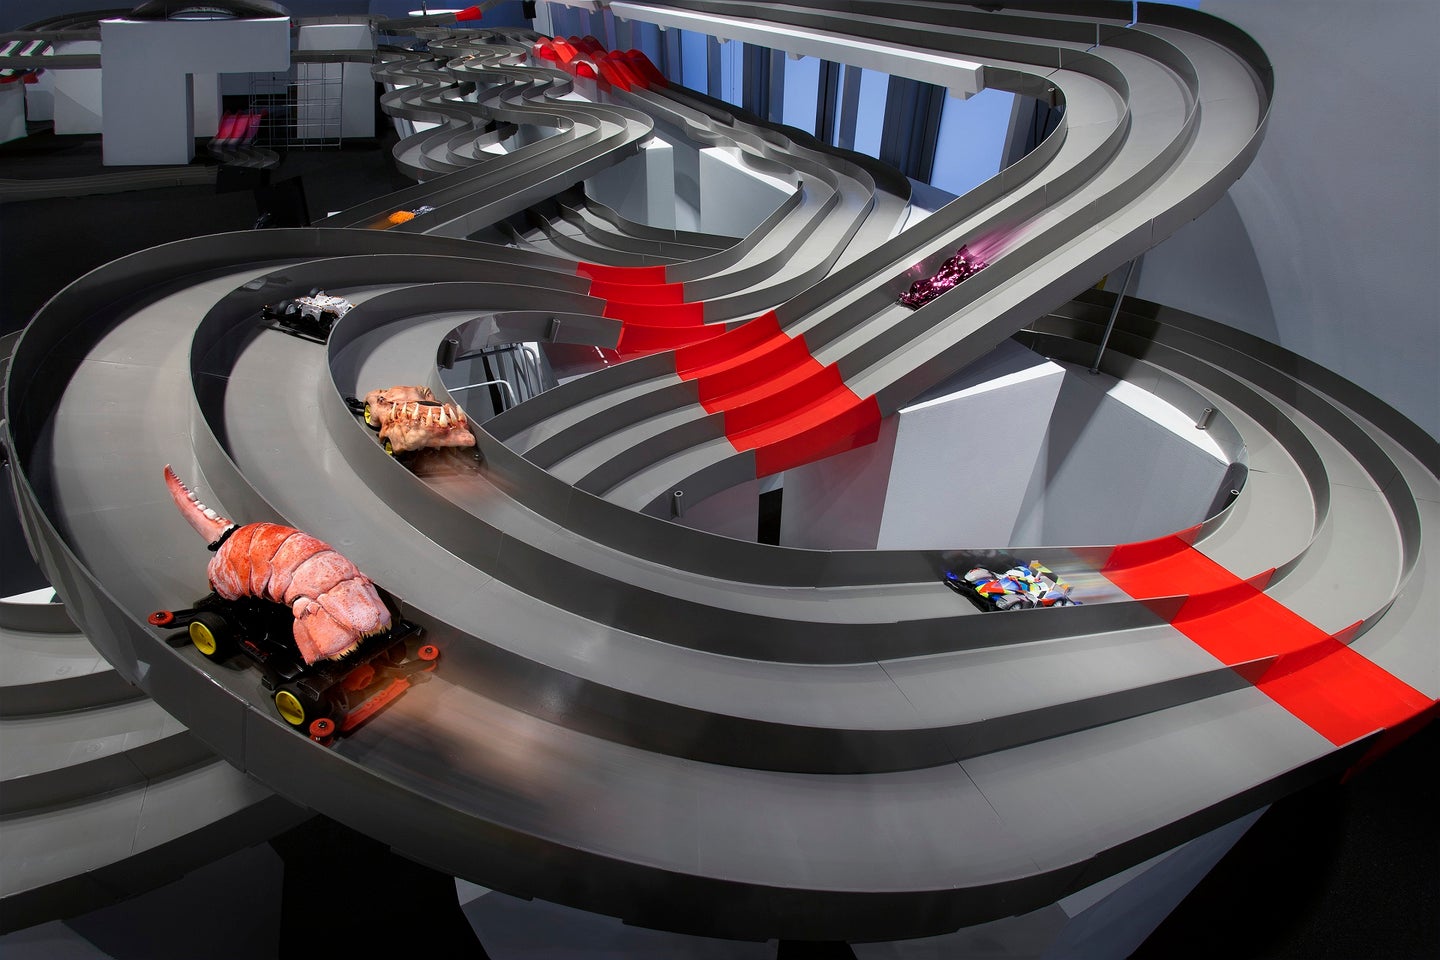 Visionaire RACING, the interactive exhibit featuring the largest